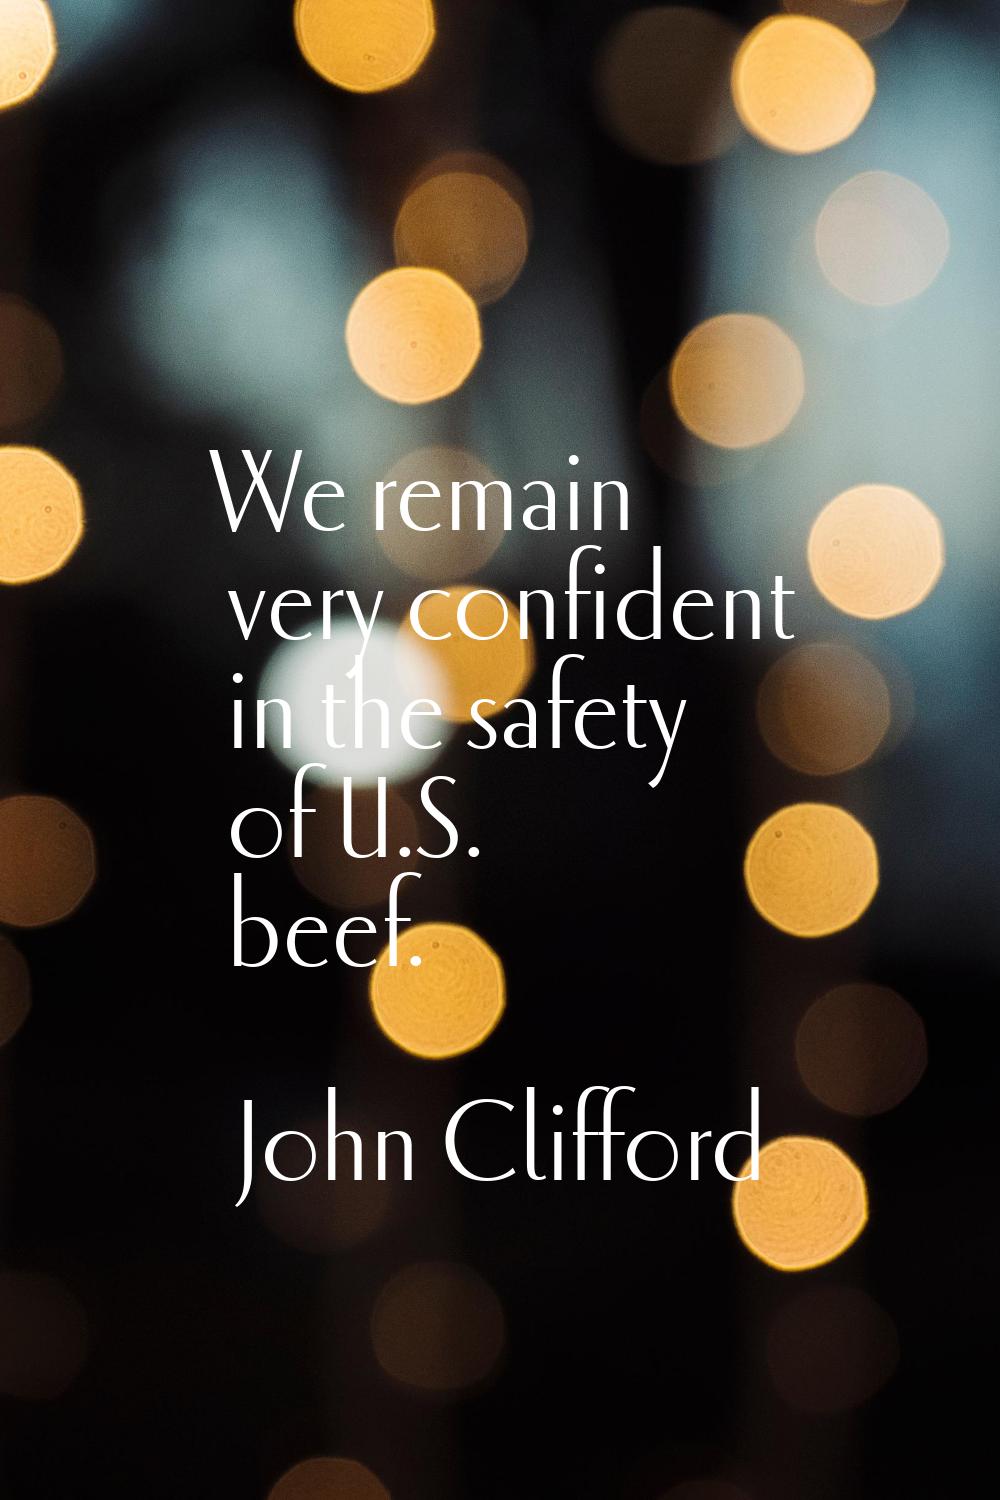 We remain very confident in the safety of U.S. beef.